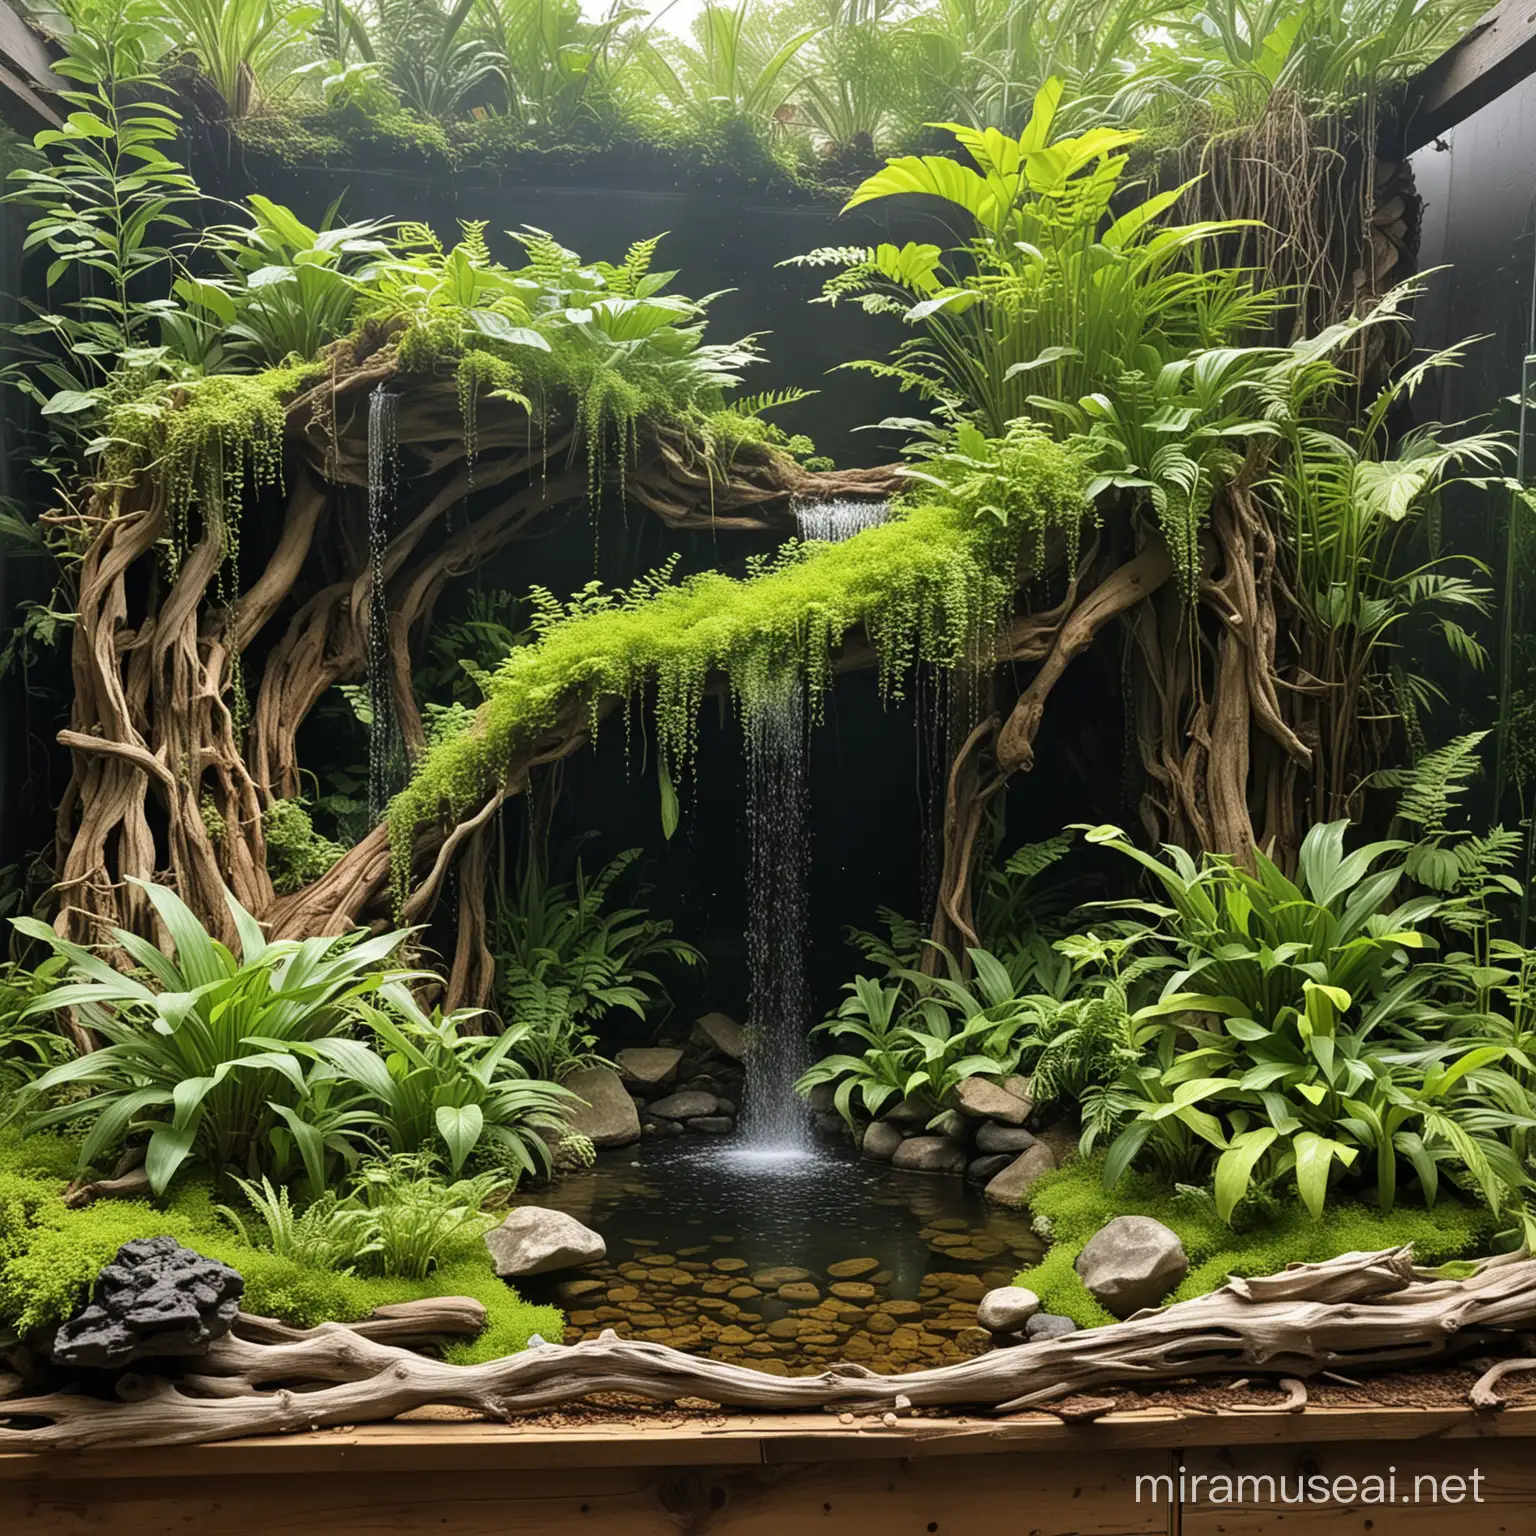 Lush Rainforest Paludarium with Cascading Waterfall and Driftwood